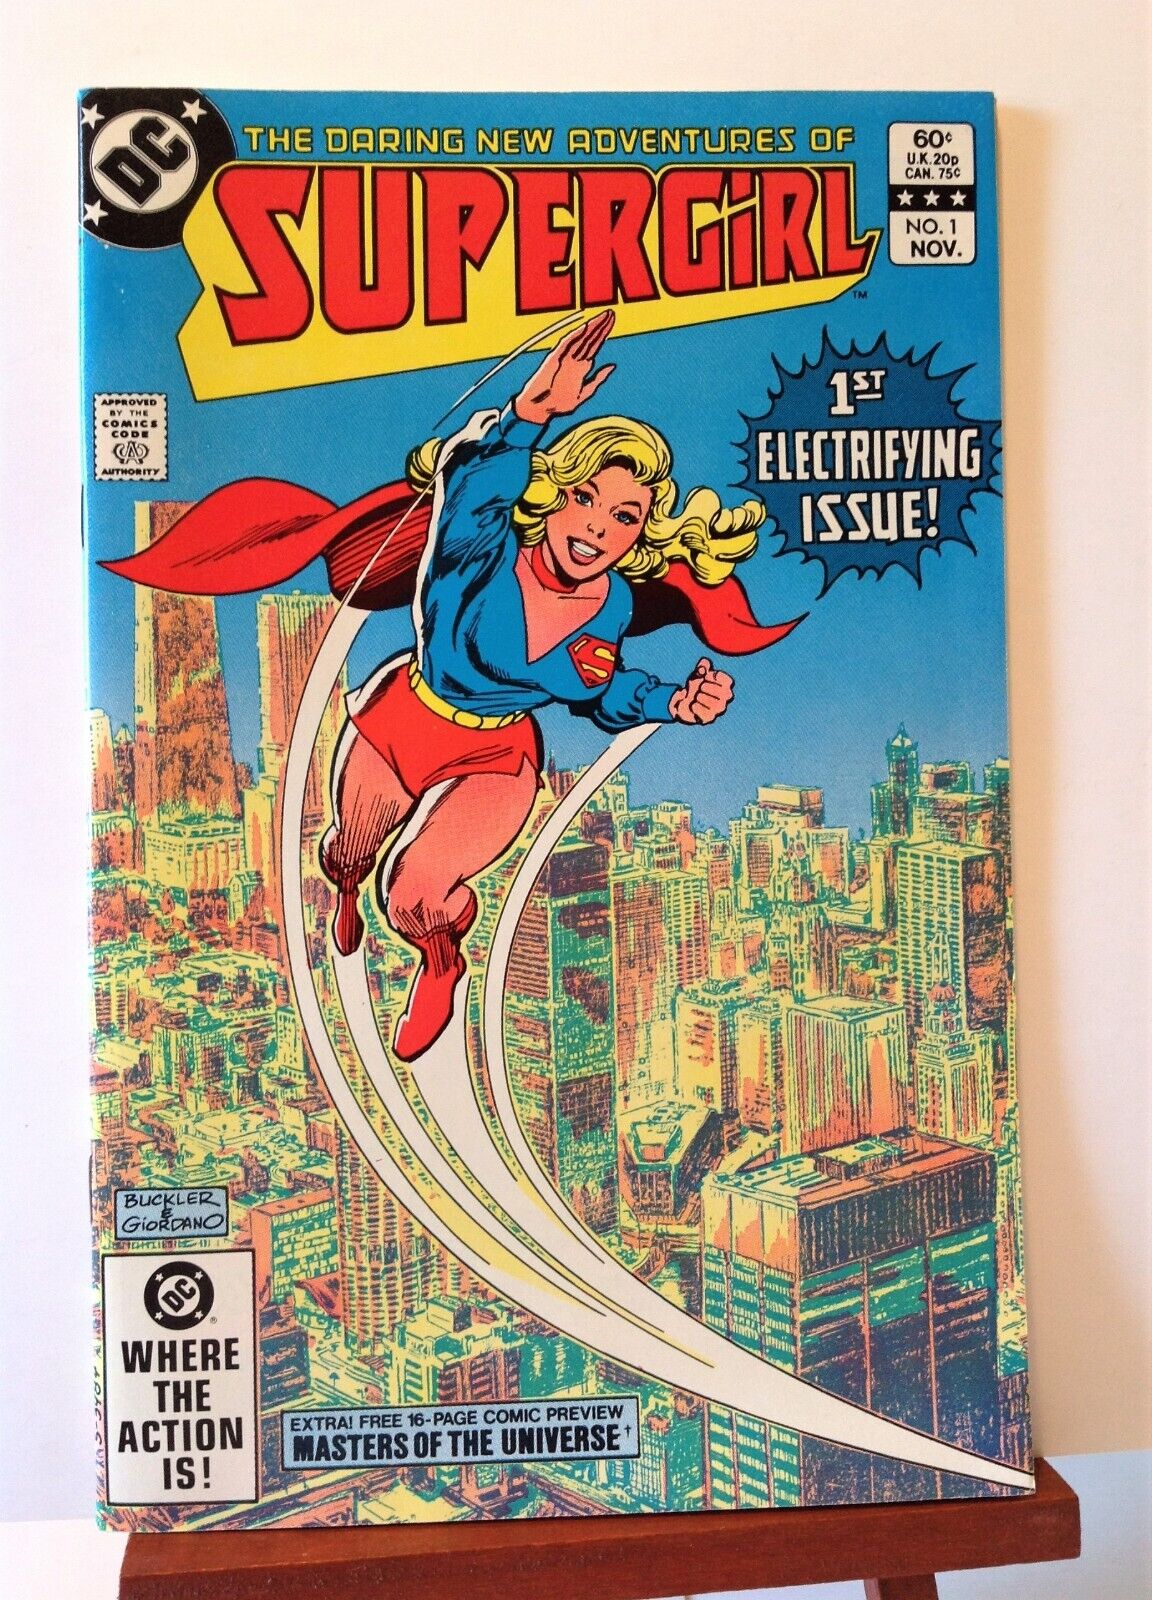 The Daring New Adventures of Supergirl #1 1982 Masters of the Universe Preview C